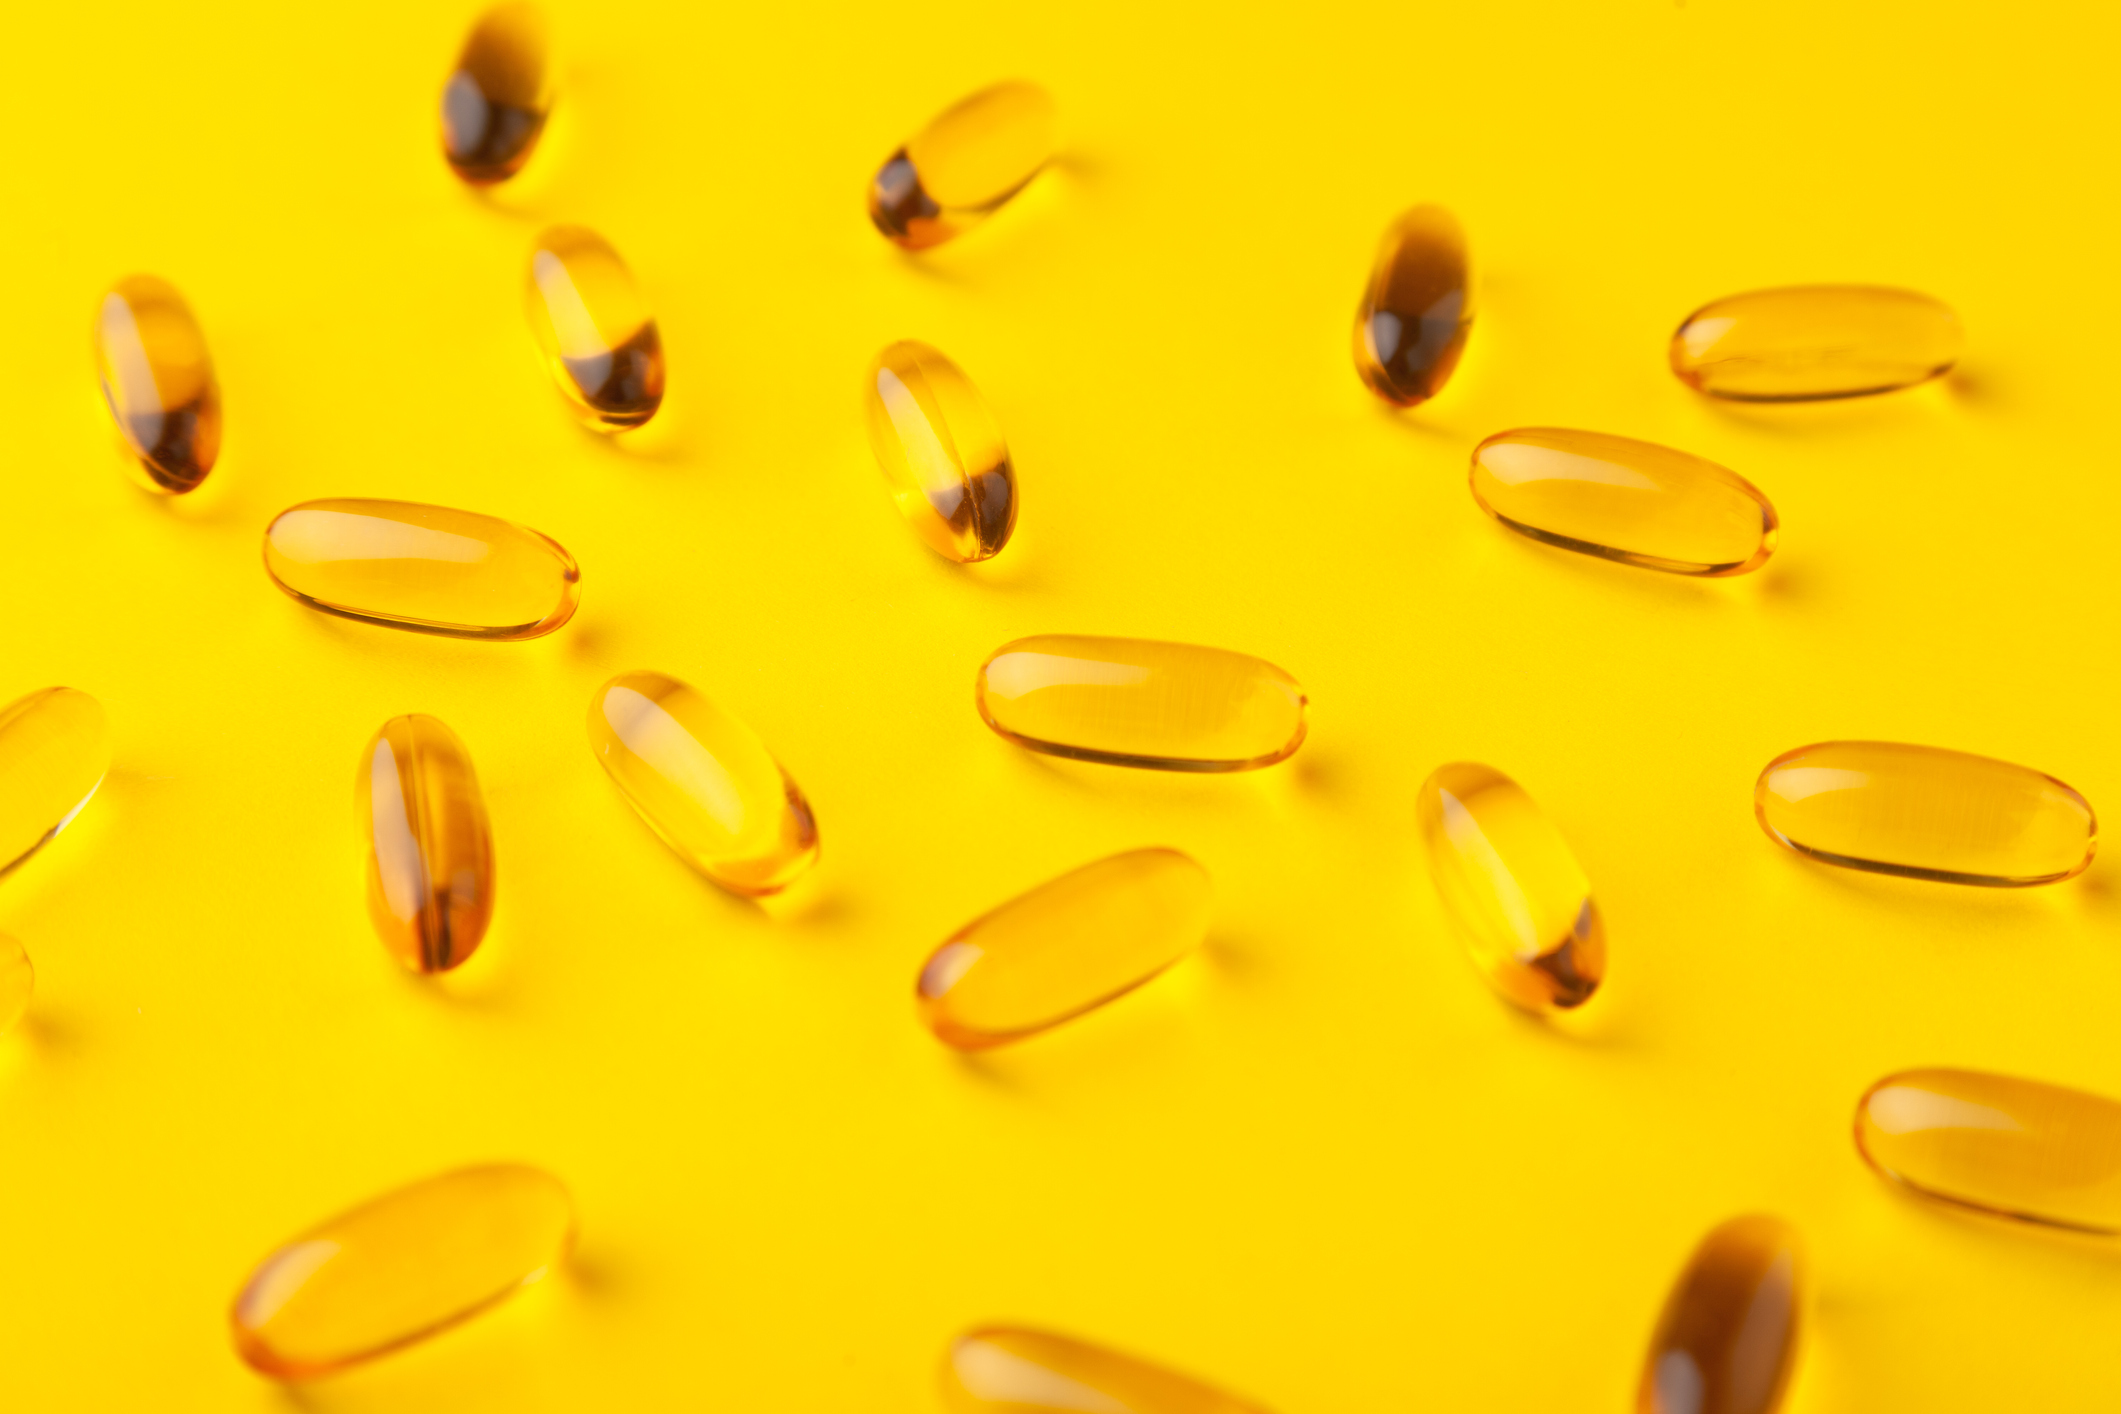 Study finds optimal dose of omega-3s to lower blood pressure